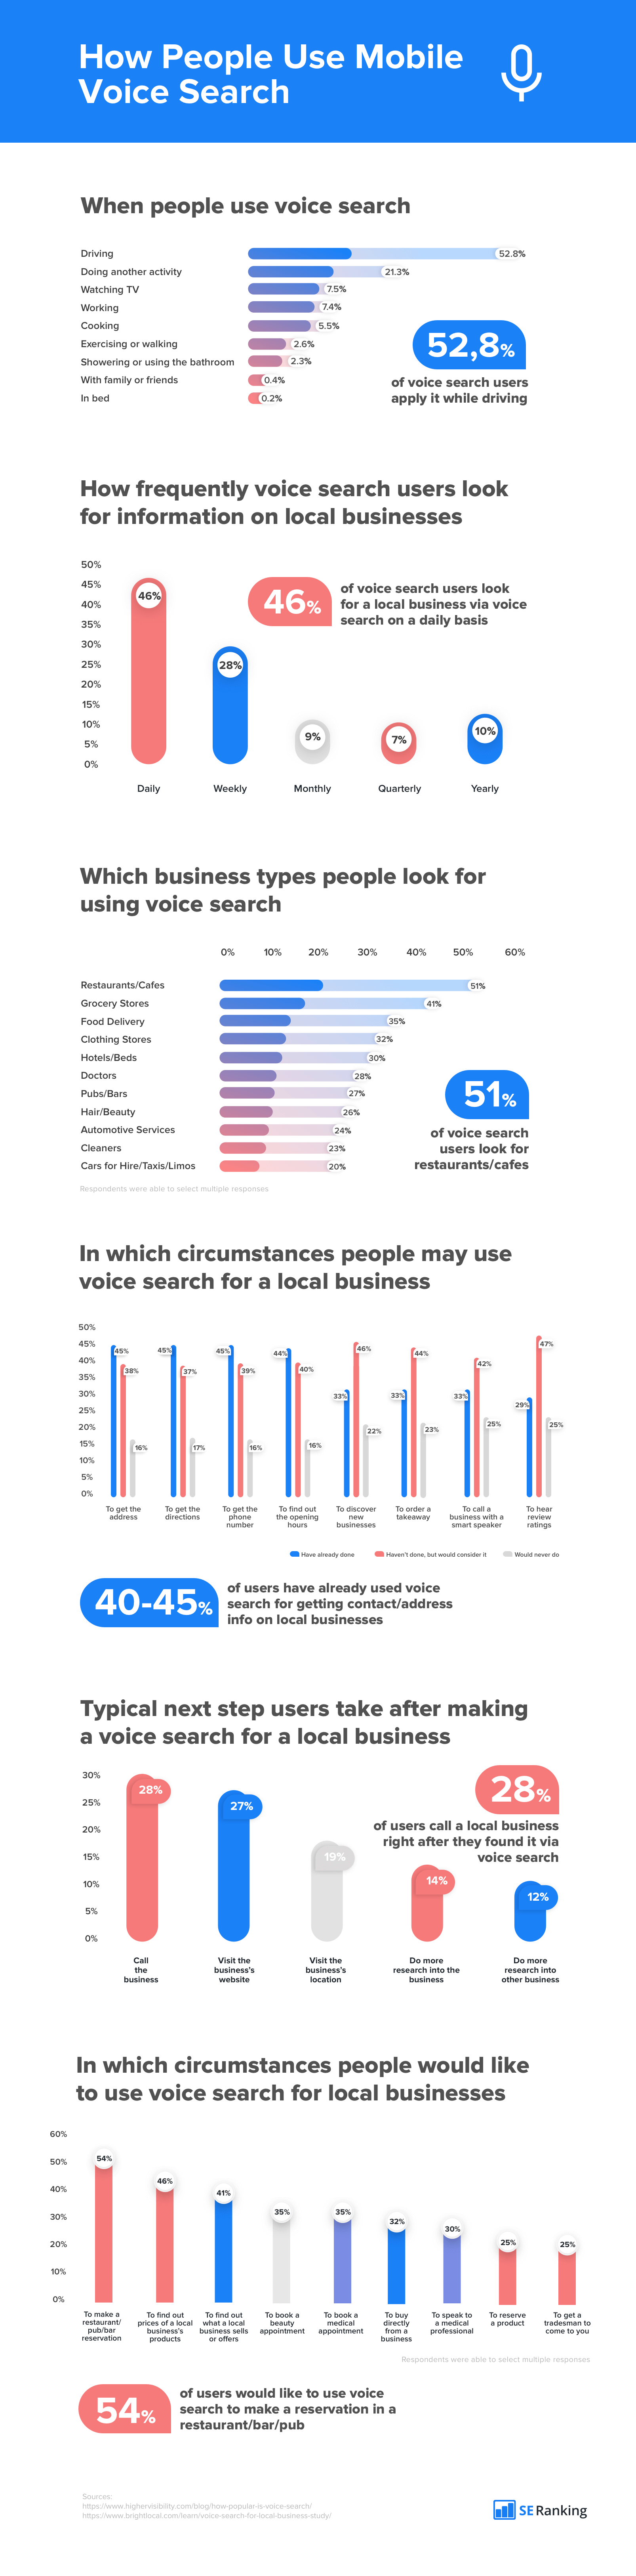 How-people-use-mobile-voice-search-infographic-plaza